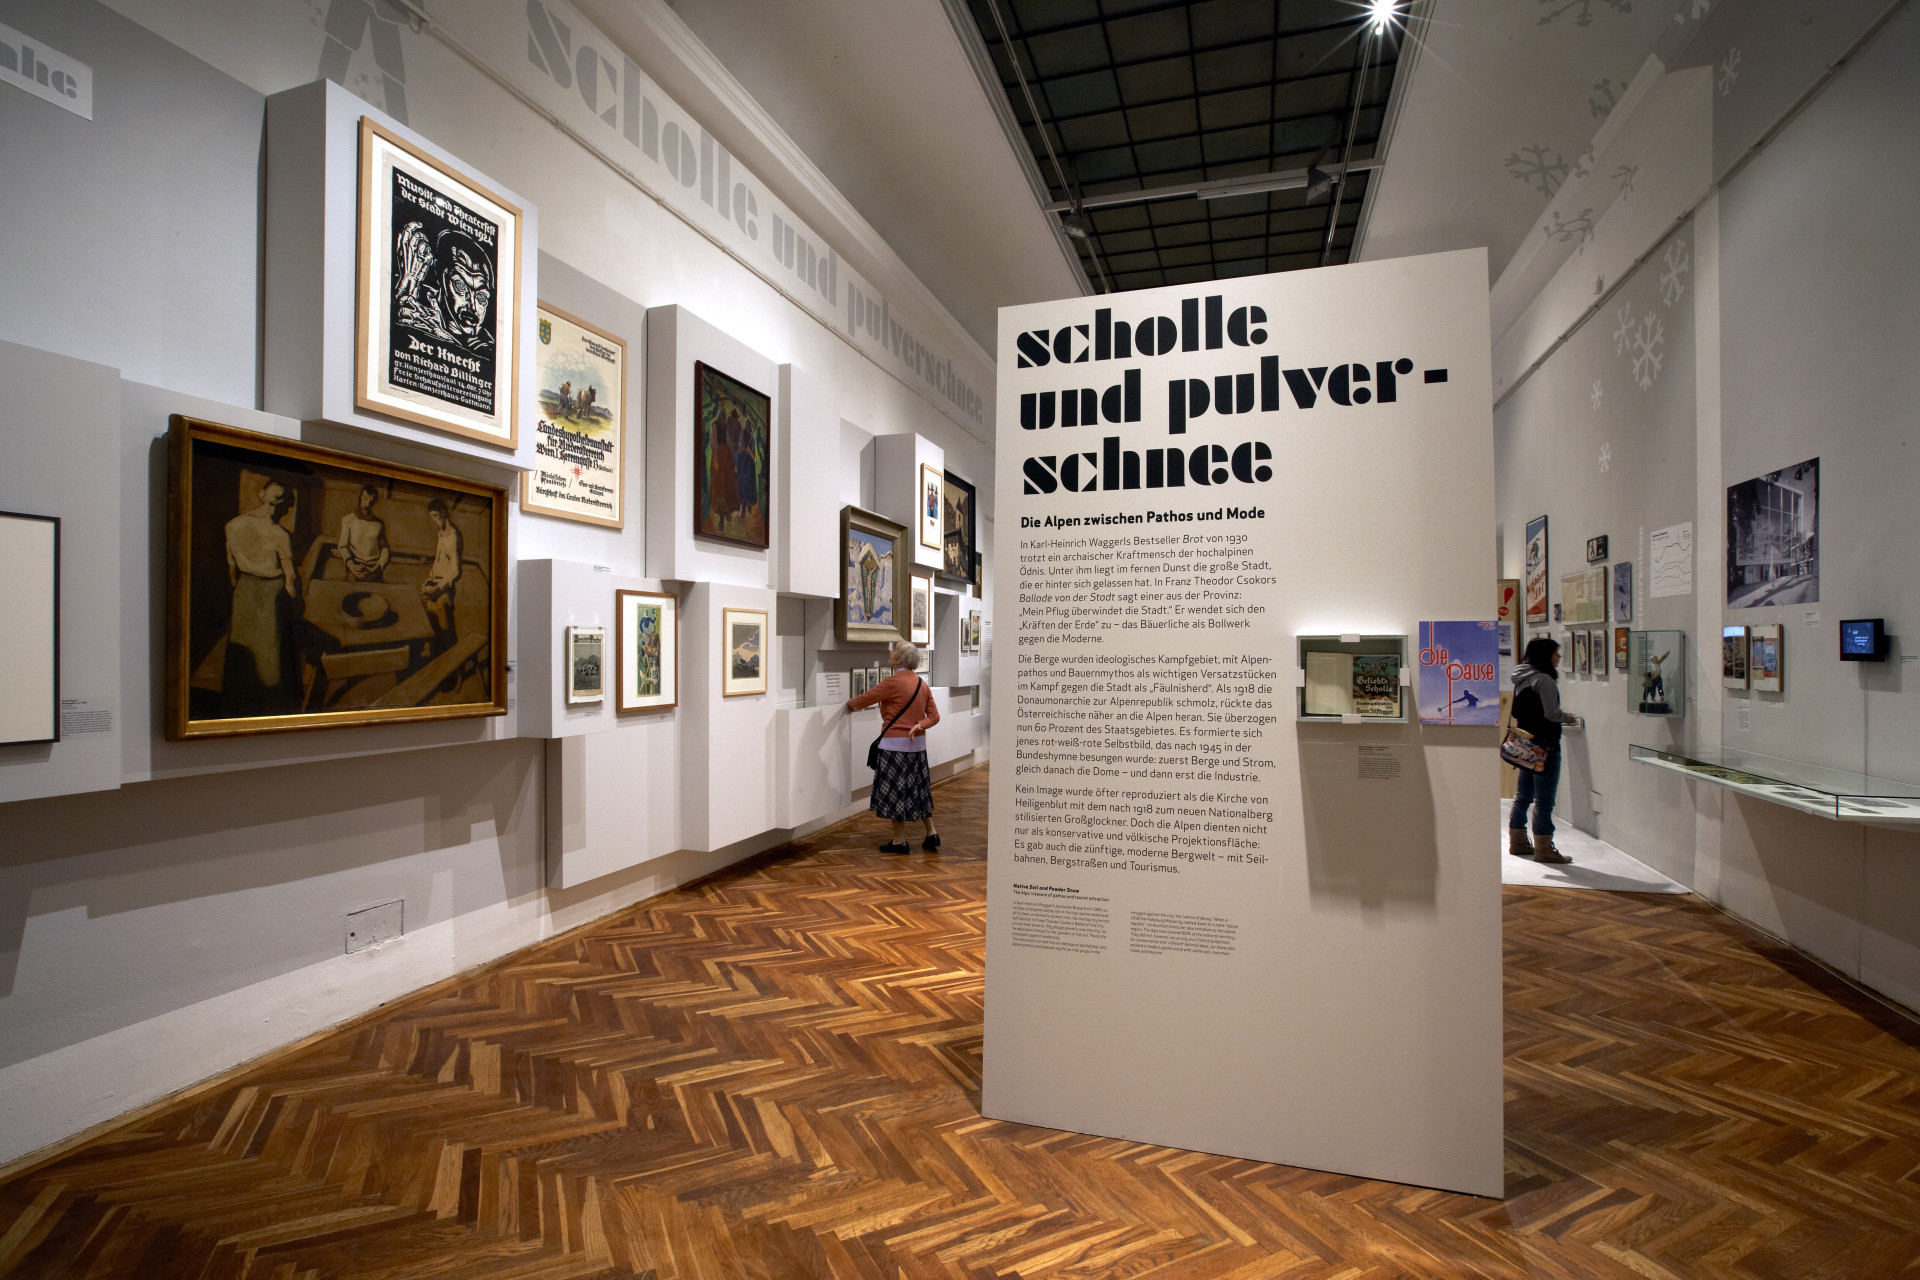 The typeface in the context of the exhibition for exhibition texts